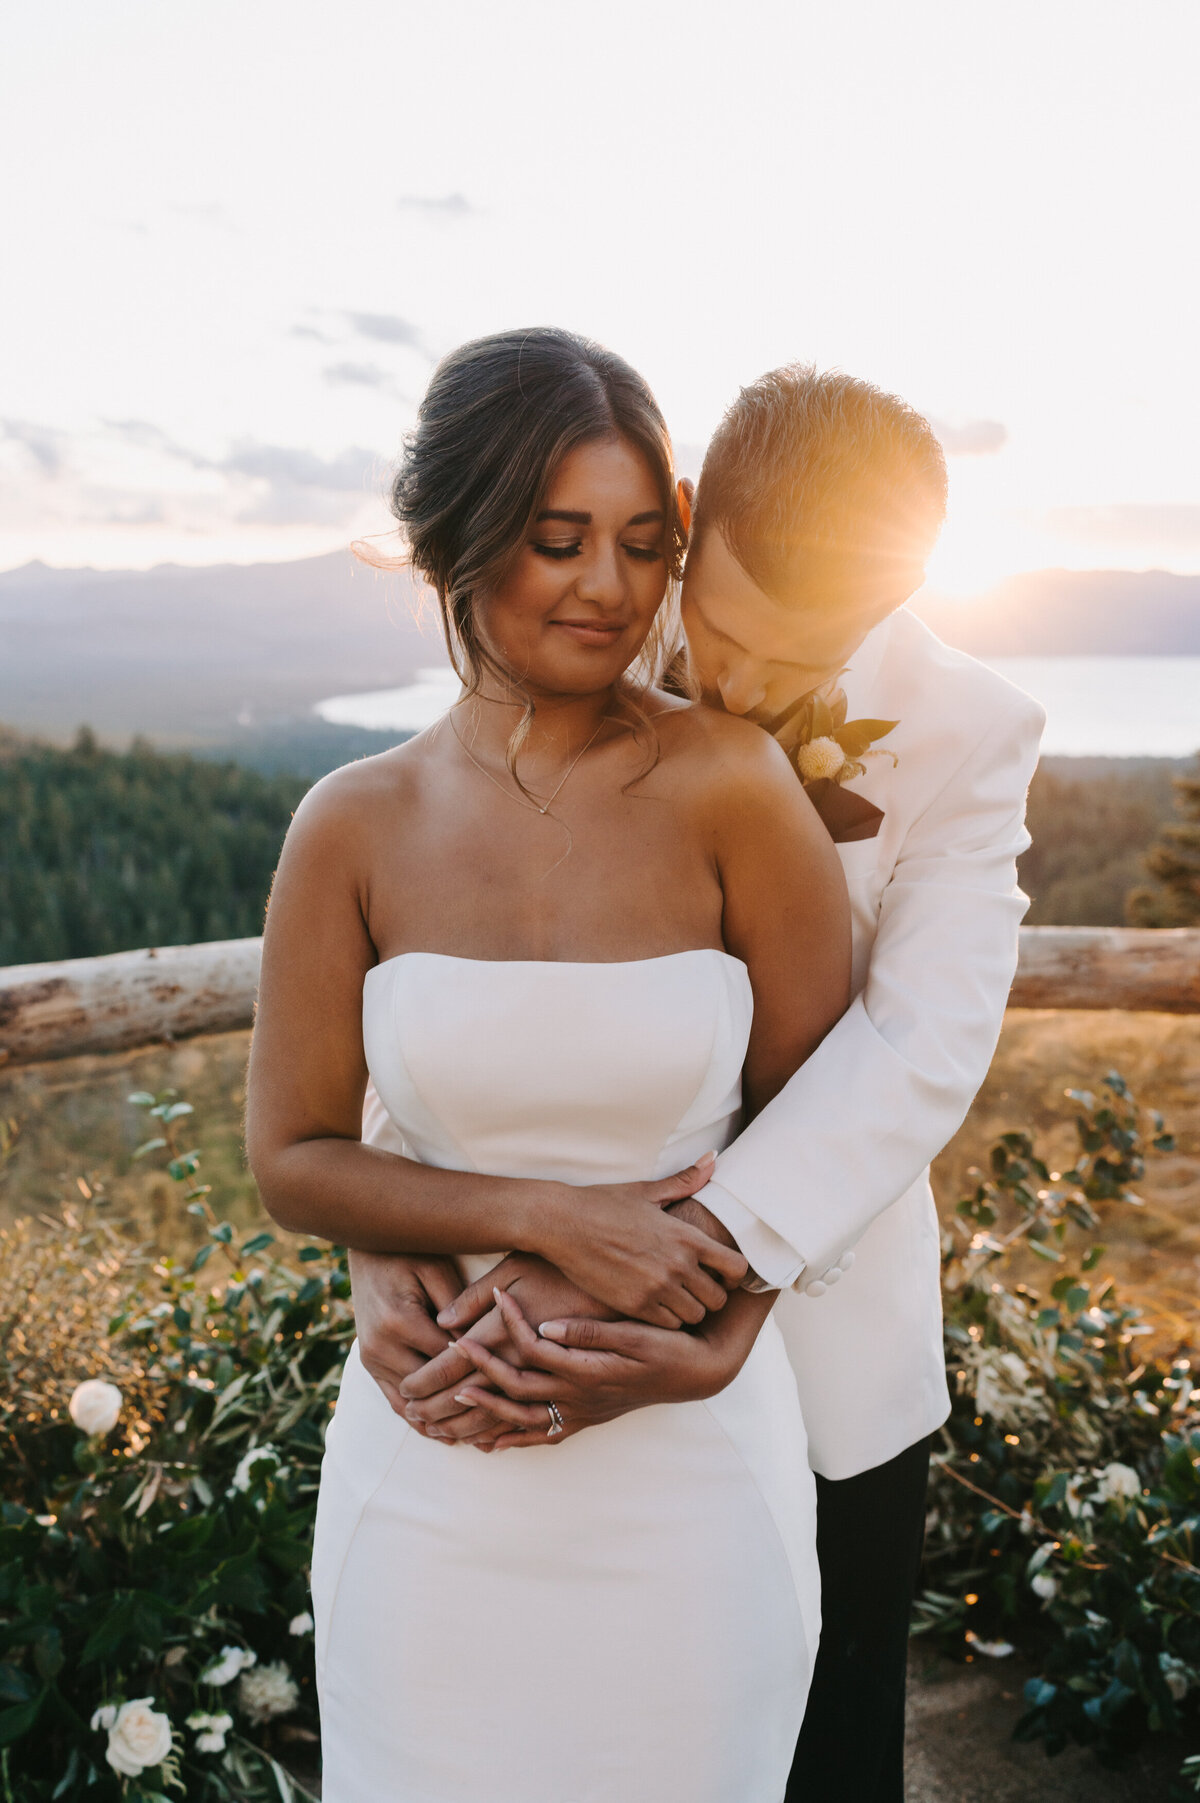 A colorful portrait of Michelle and Julien on their wedding day at Tahoe Blue Estate in Lake Tahoe, Nevada. The portrait is at sunset with the sun glowing behind the groom’s shoulder. The bride’s back is against the groom who has his arms wrapped around her waist while he’s kissing her on the shoulder. Her head is turned slightly towards him, her eyes downcast and she has a slight smile. The view of the lake and mountains are behind them. Wedding photographs by Stacie McChesney of Vitae Weddings.